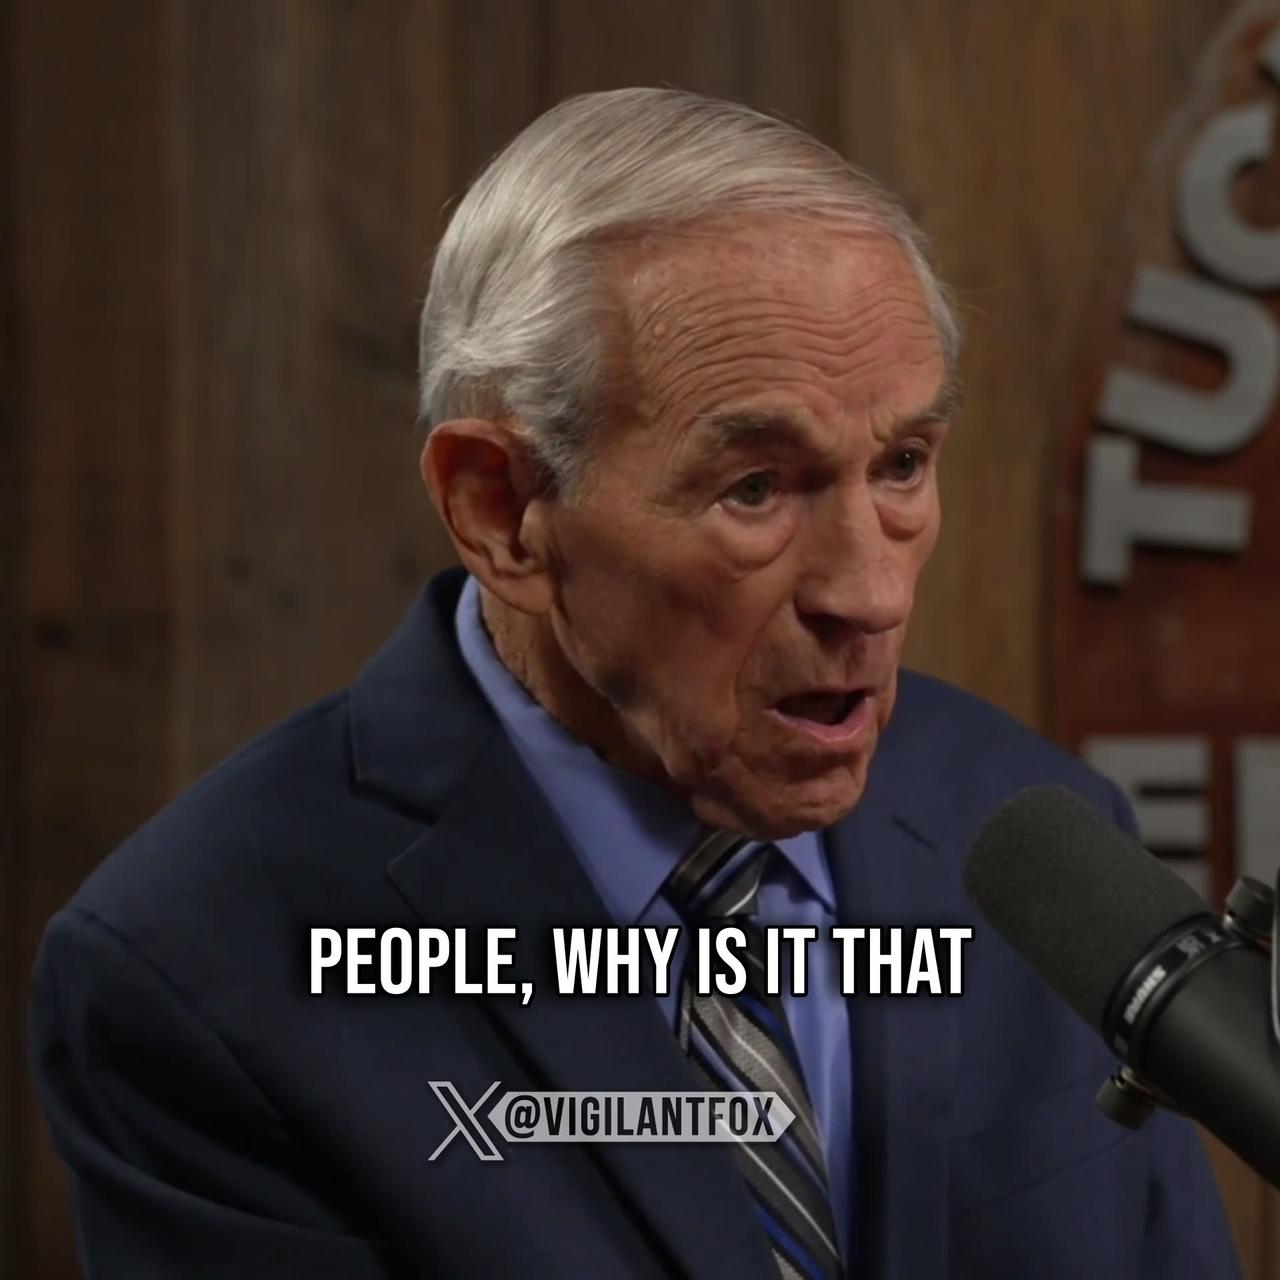 Ron Paul Drops Bombshell Question on Government Authority